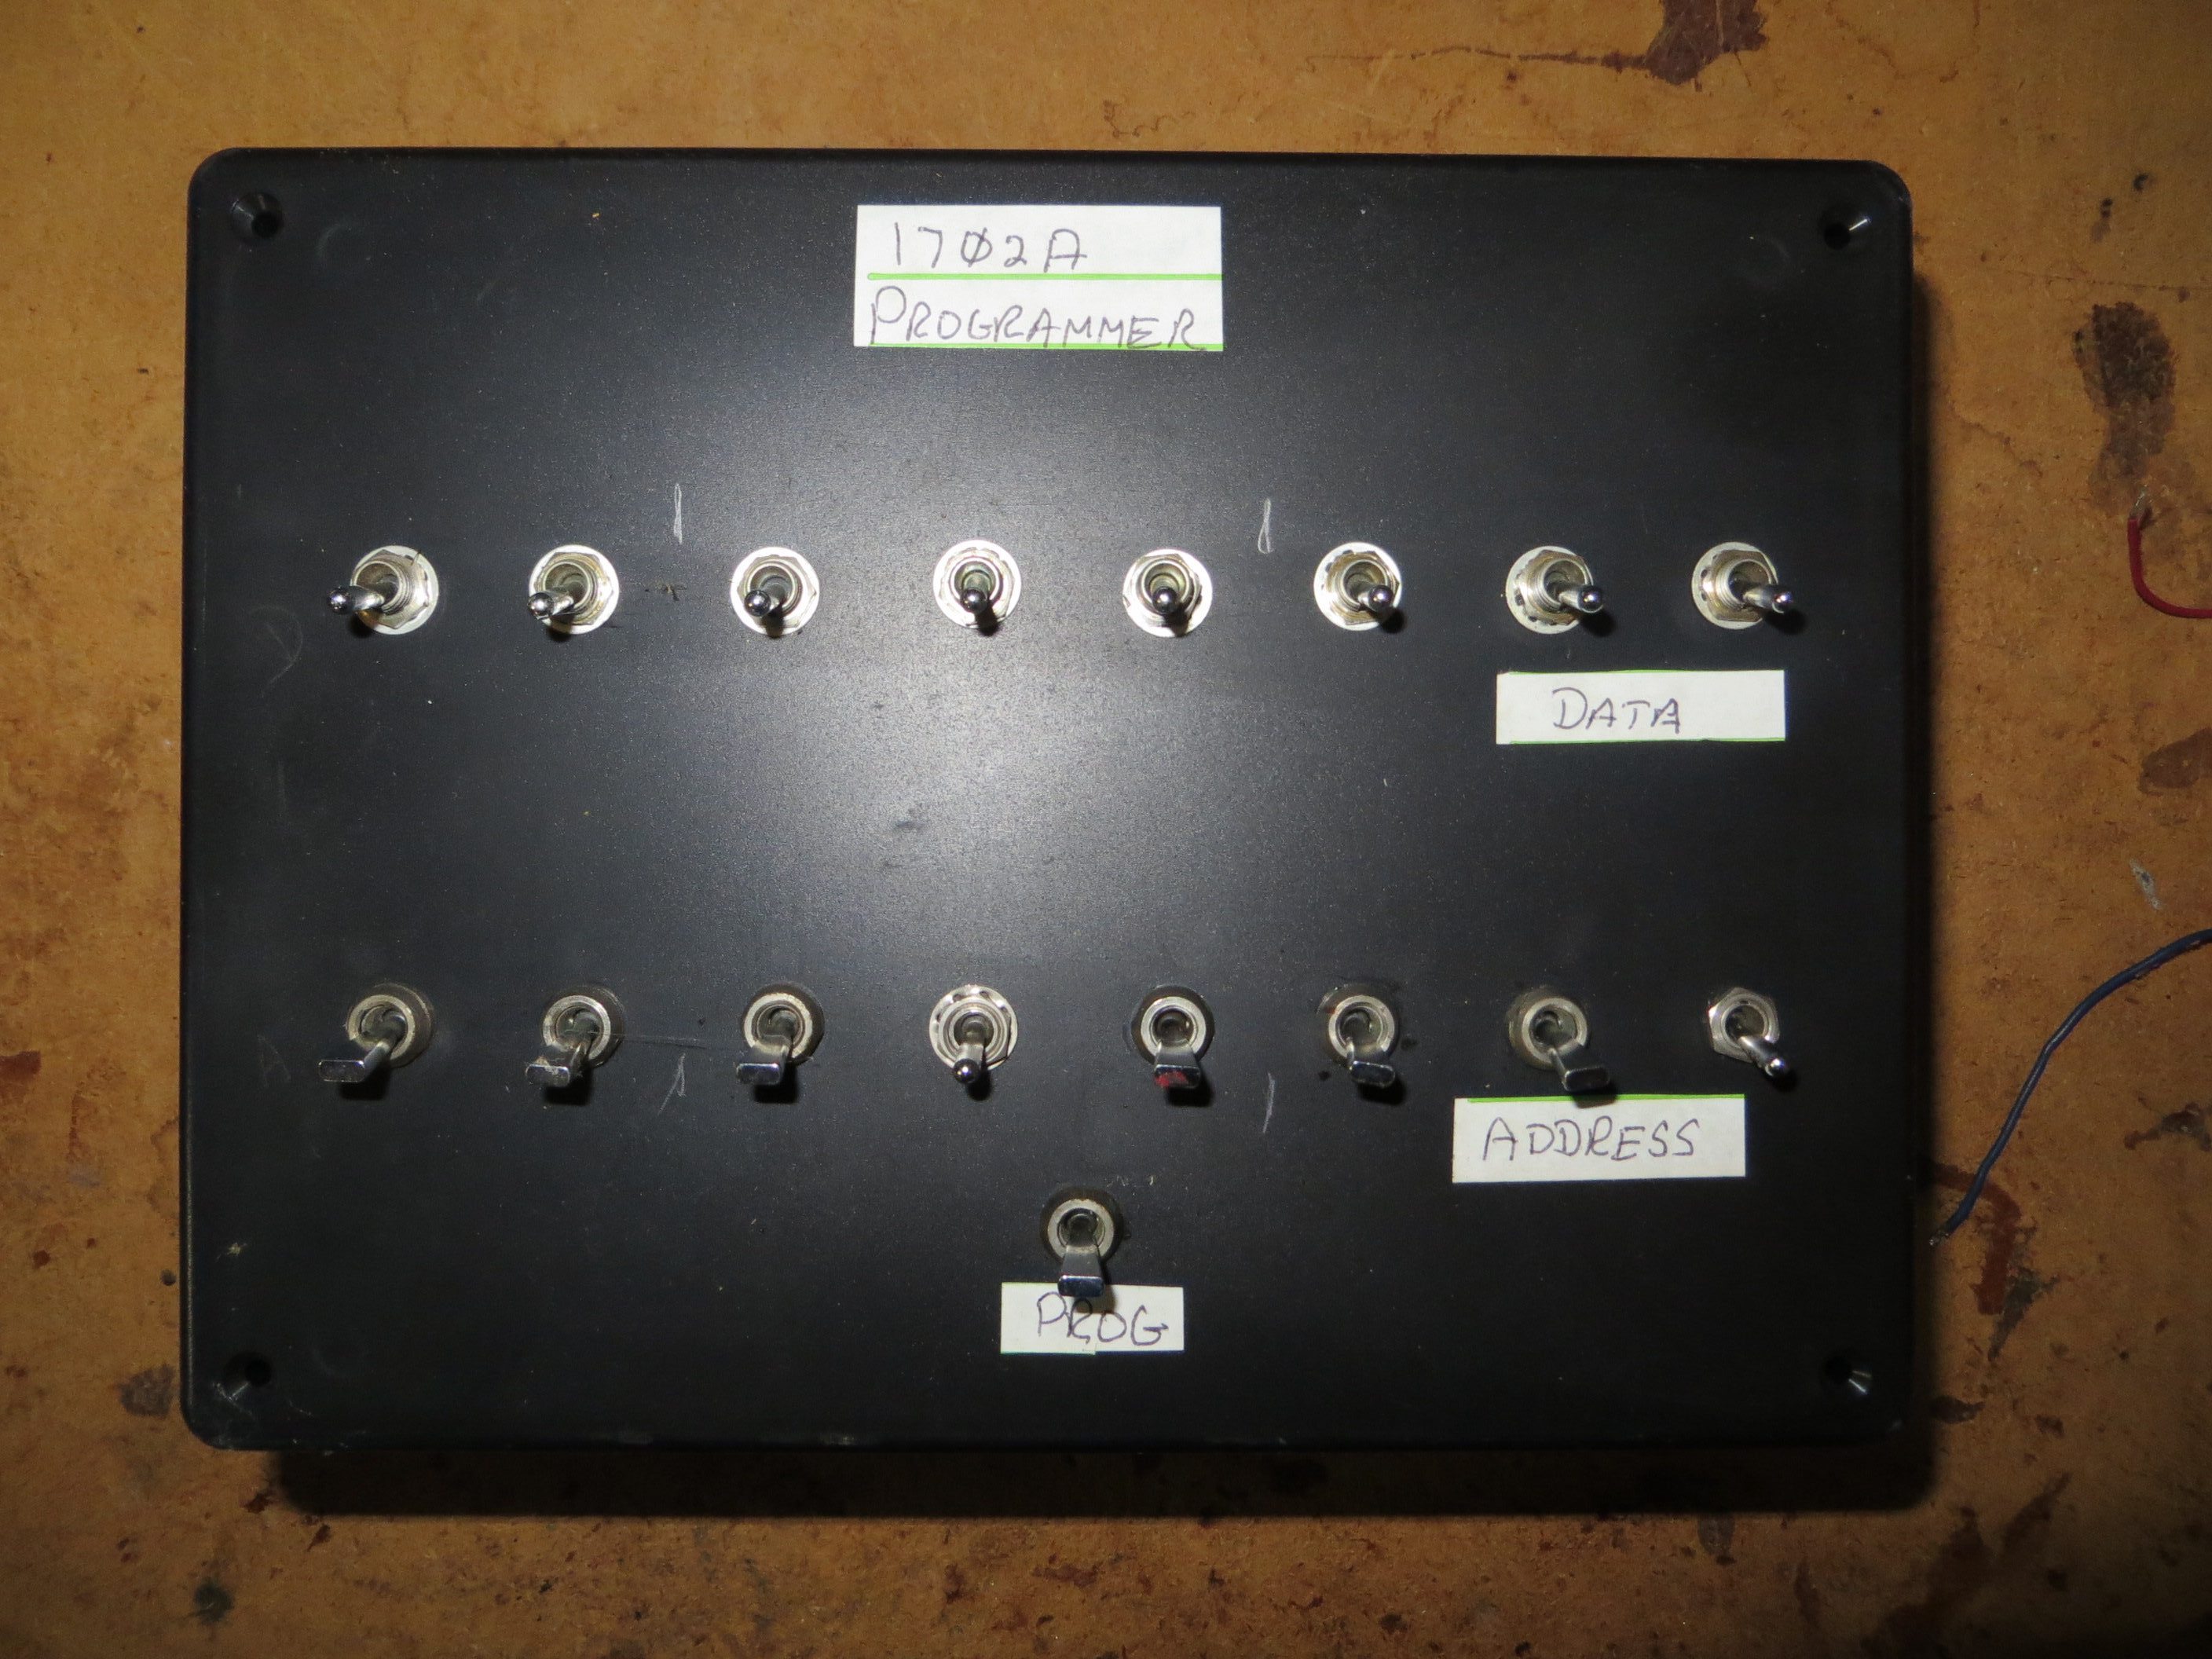 1702A EPROM Programmer Console